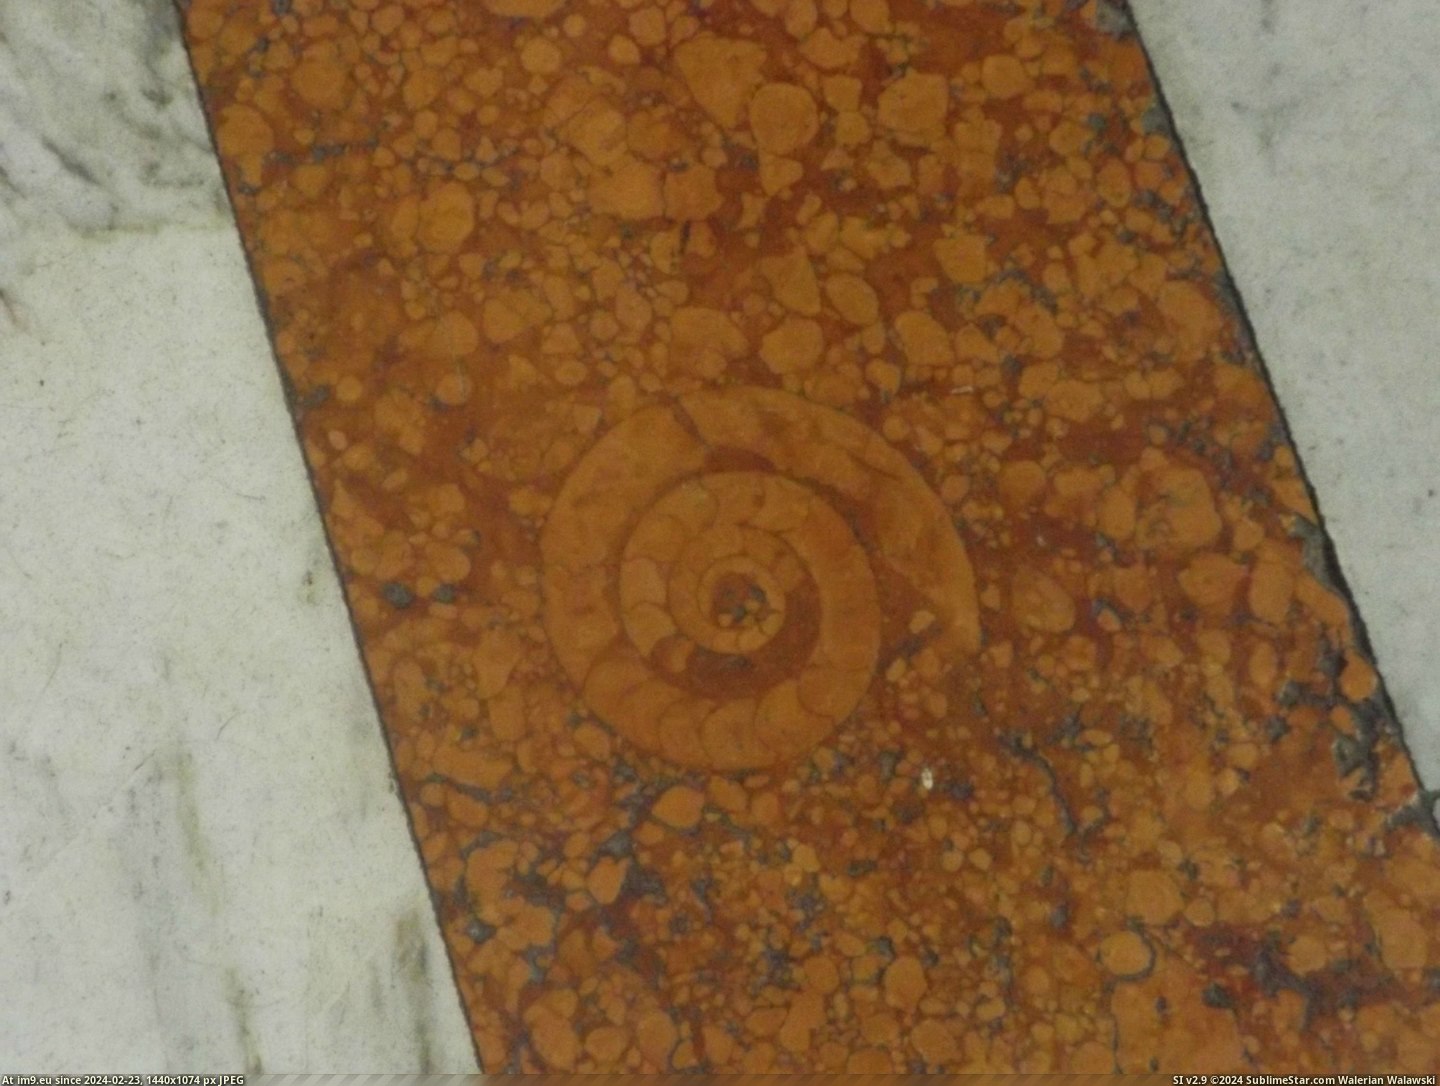 [Mildlyinteresting] Went to the Church of St Ignatius in Rome and saw this fossil cut in half in the marble on the floor (in My r/MILDLYINTERESTING favs)